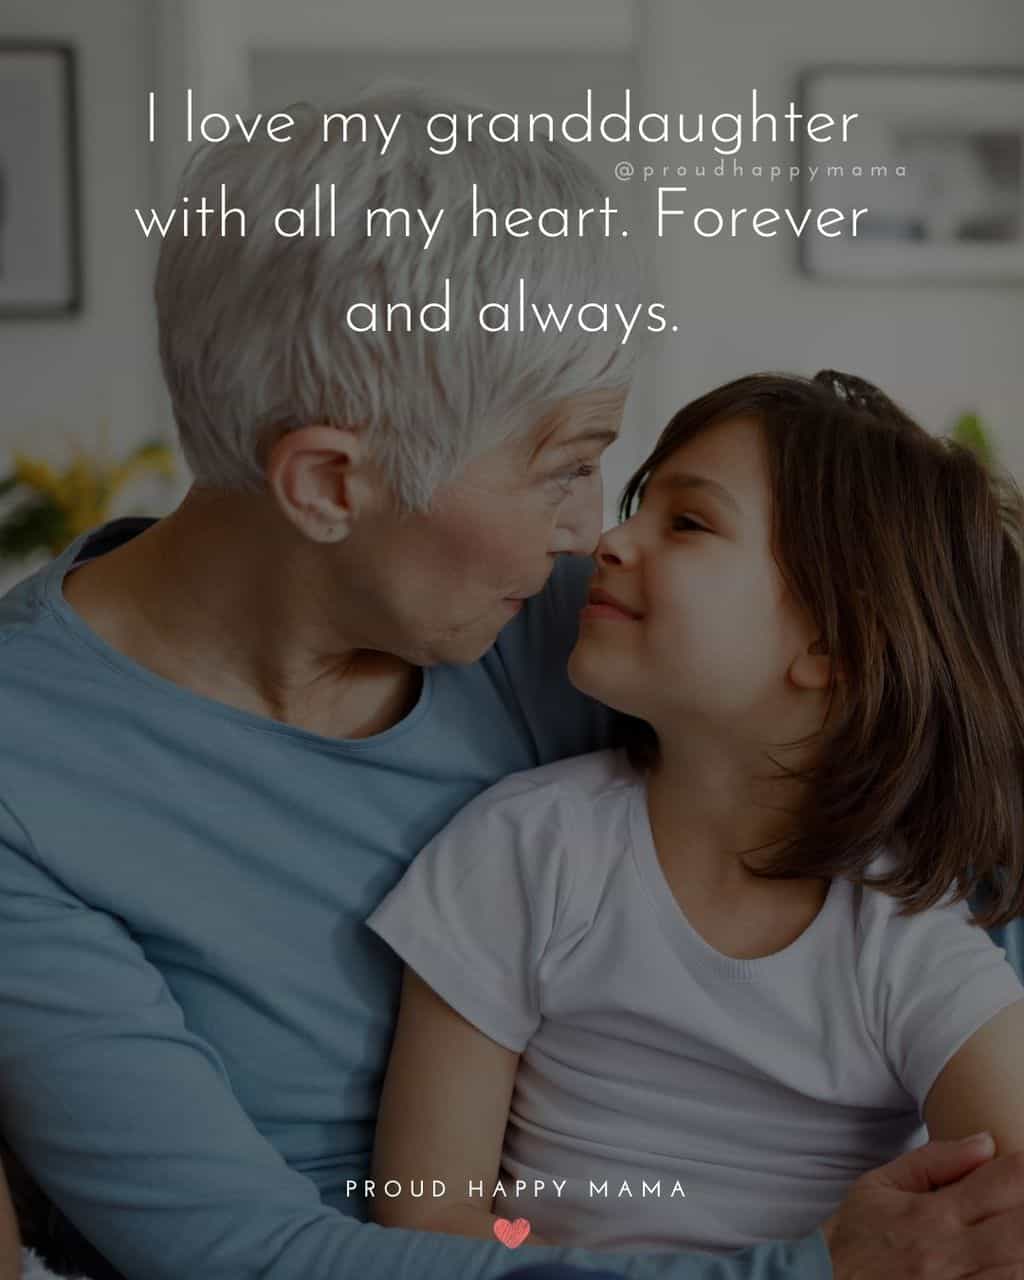 Granddaughter Quotes - I love my granddaughter with all my heart. Forever and always.’